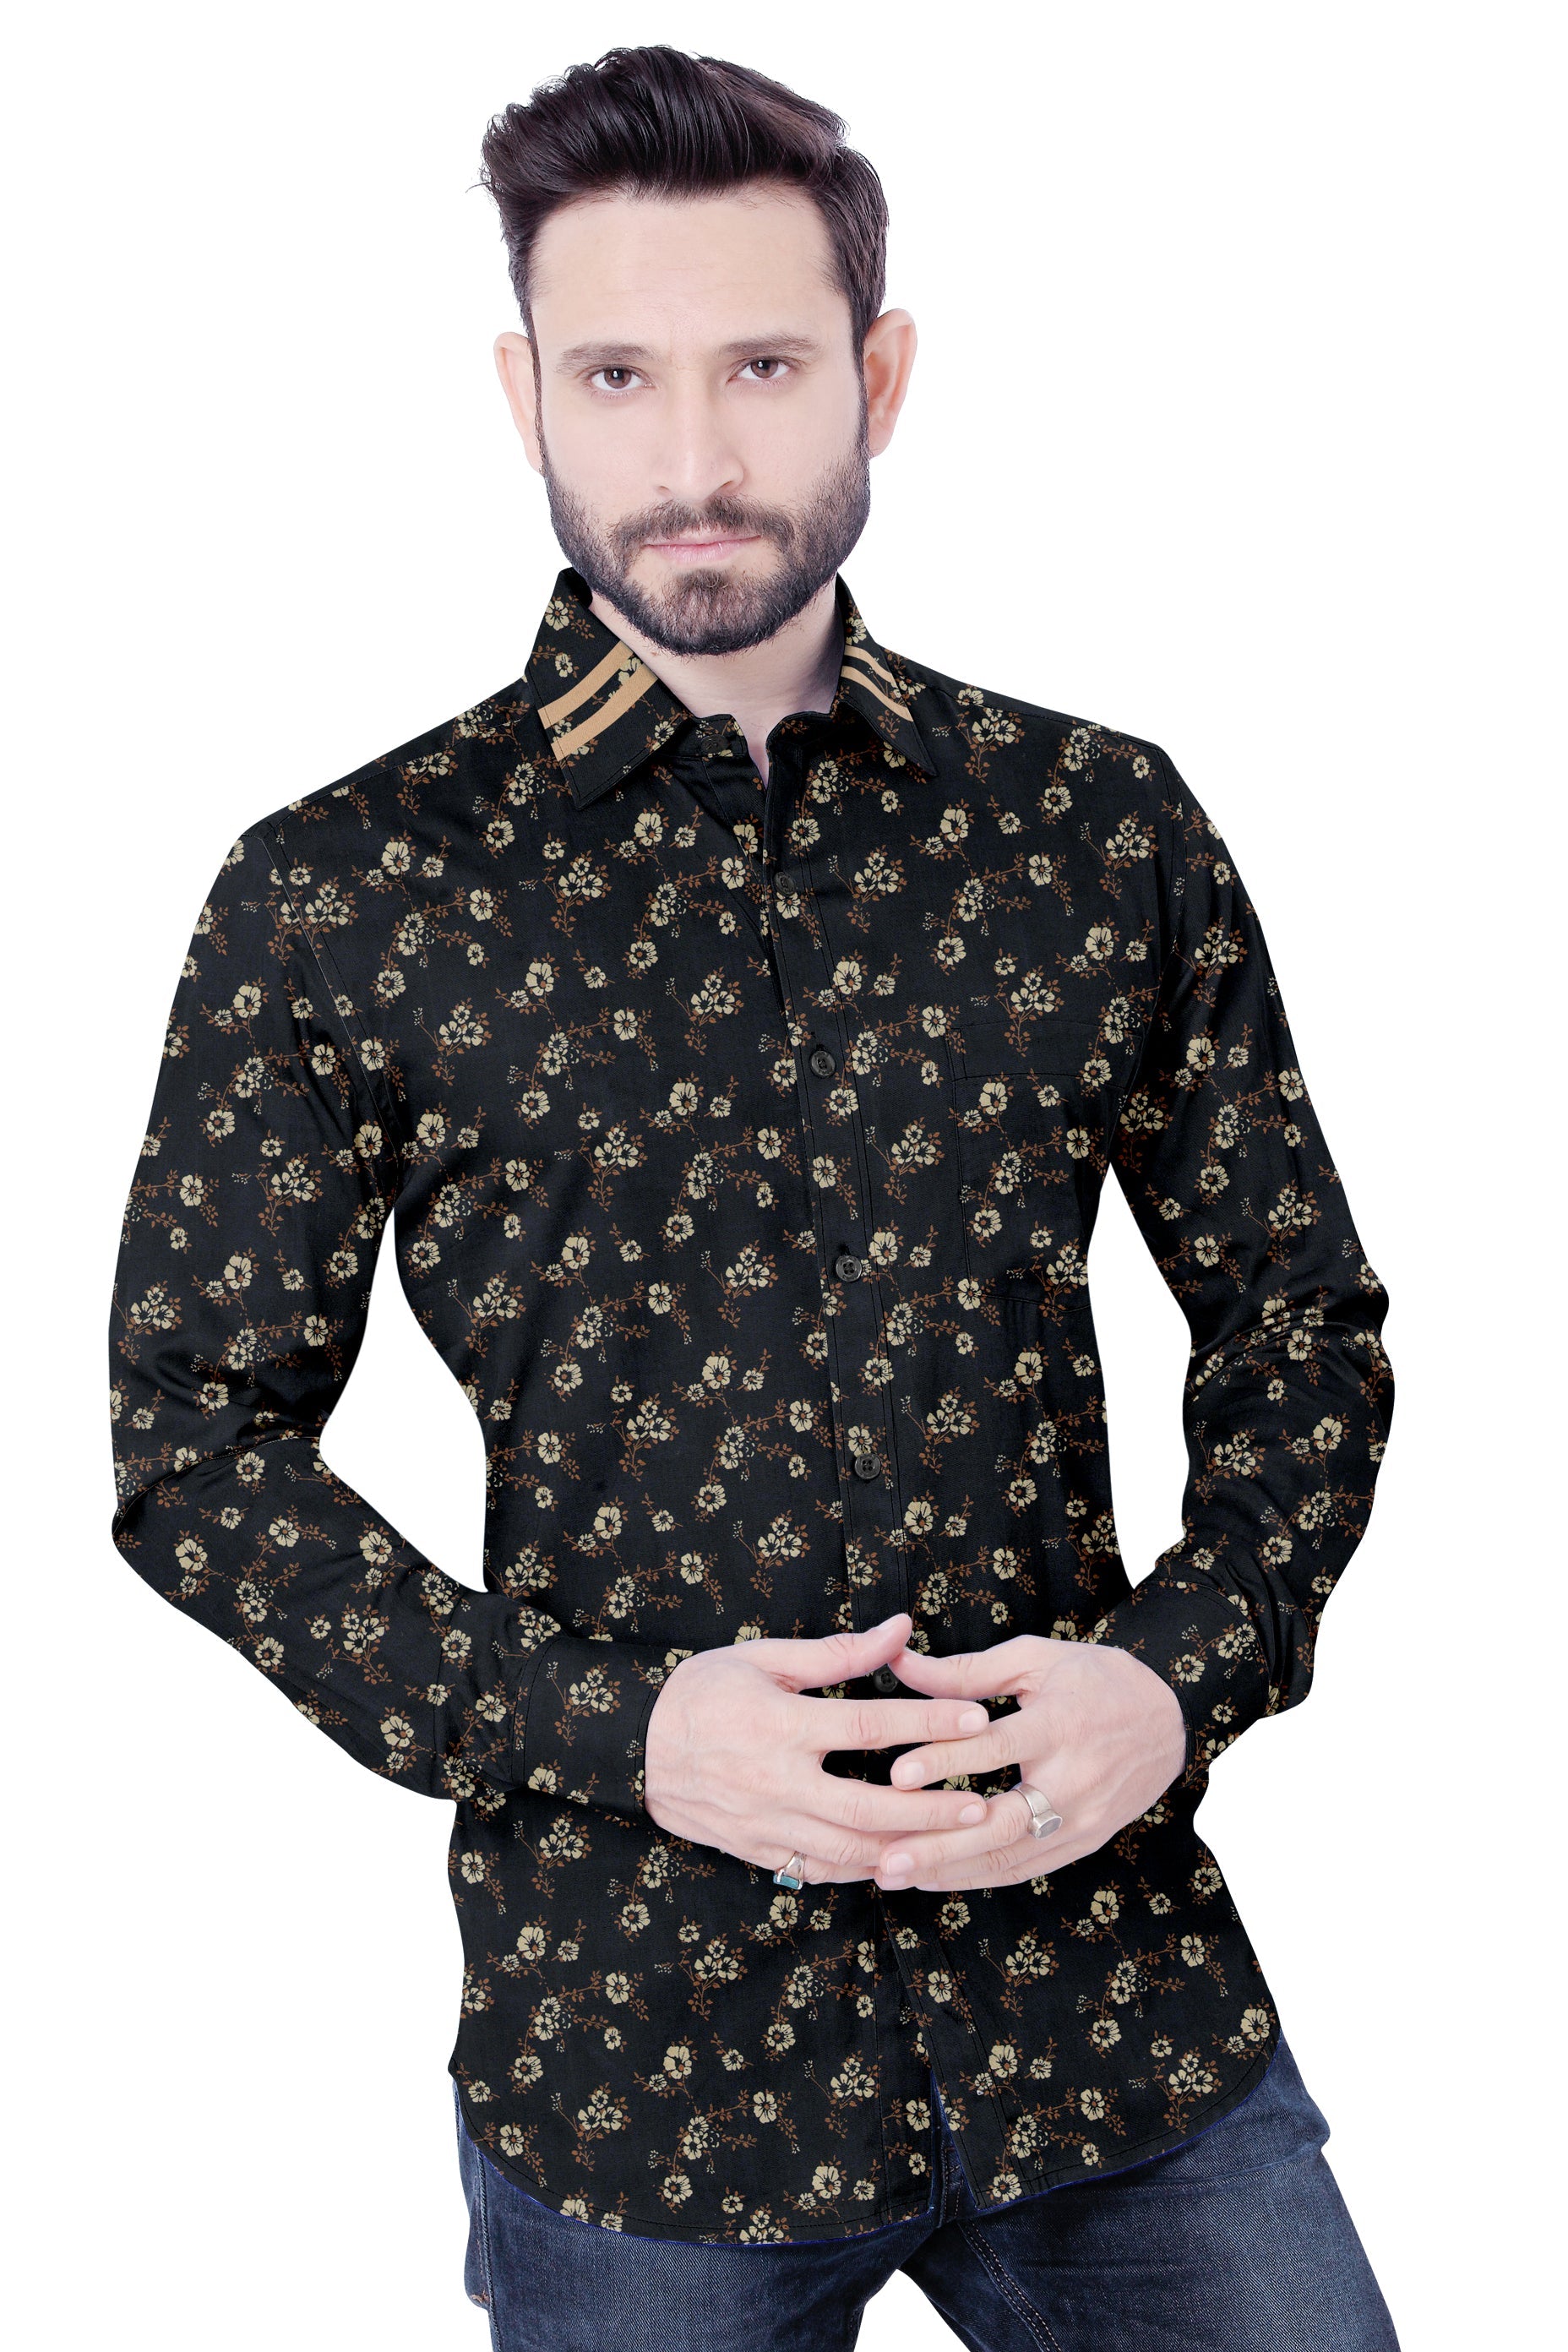 Men's Black Yellow Flower Printed Casual Full Sleeves 100% Cotton 